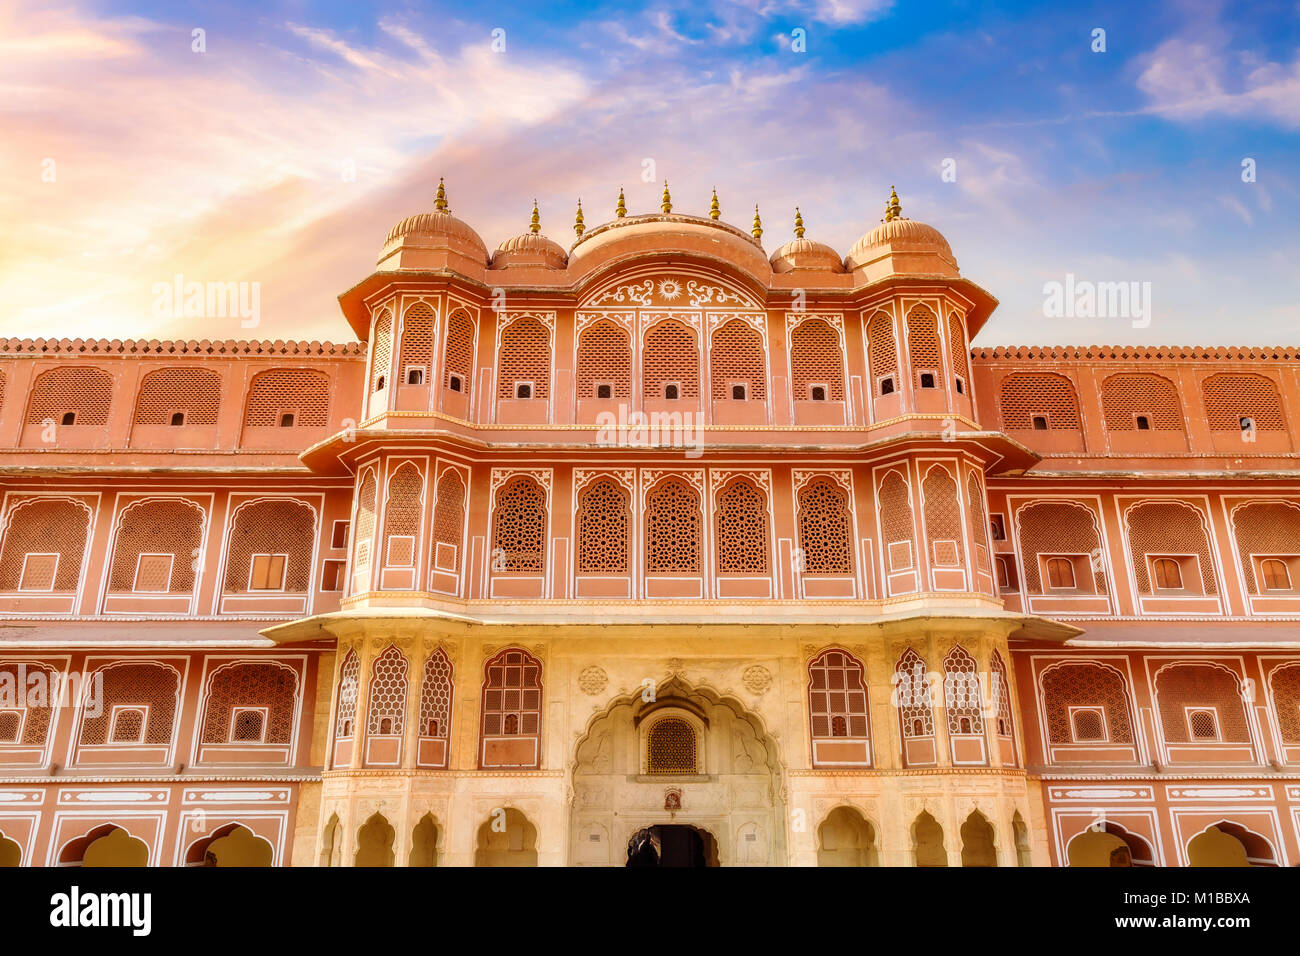 City Palace Jaipur Rajasthan - uno storico palazzo reale complesso ingresso al Chandra Mahal museo con moody Cielo di tramonto. Foto Stock